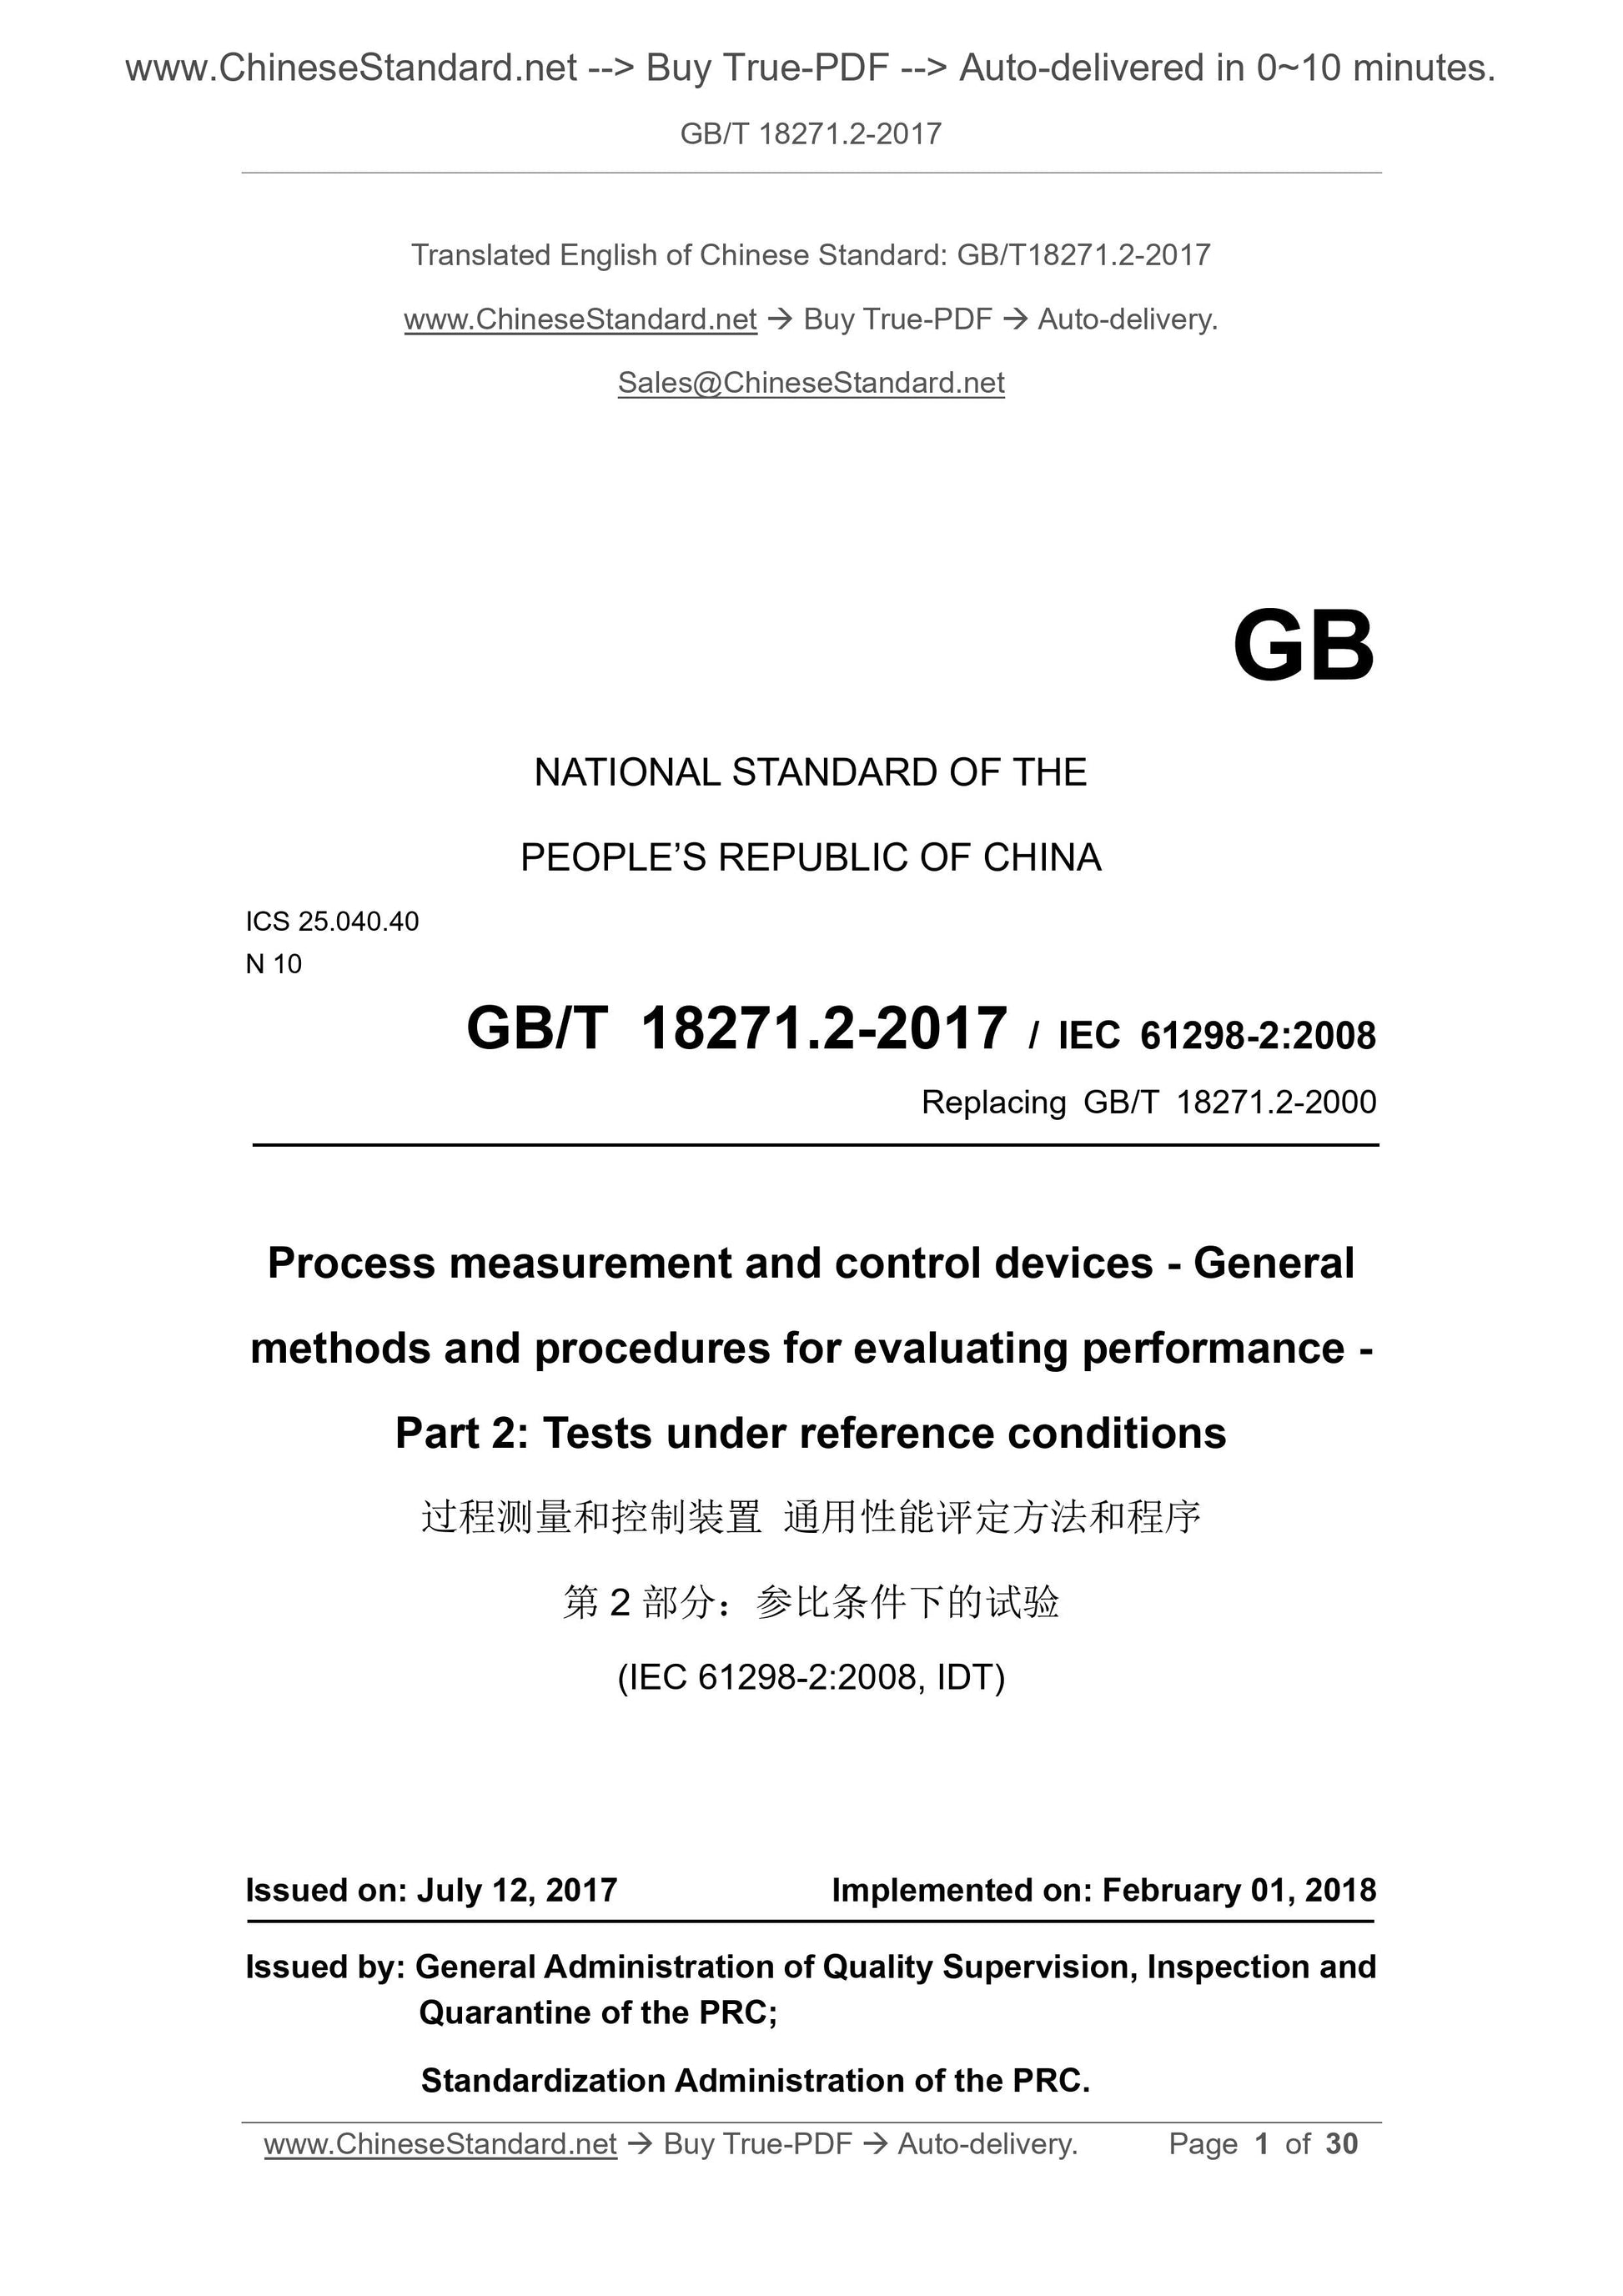 GB/T 18271.2-2017 Page 1